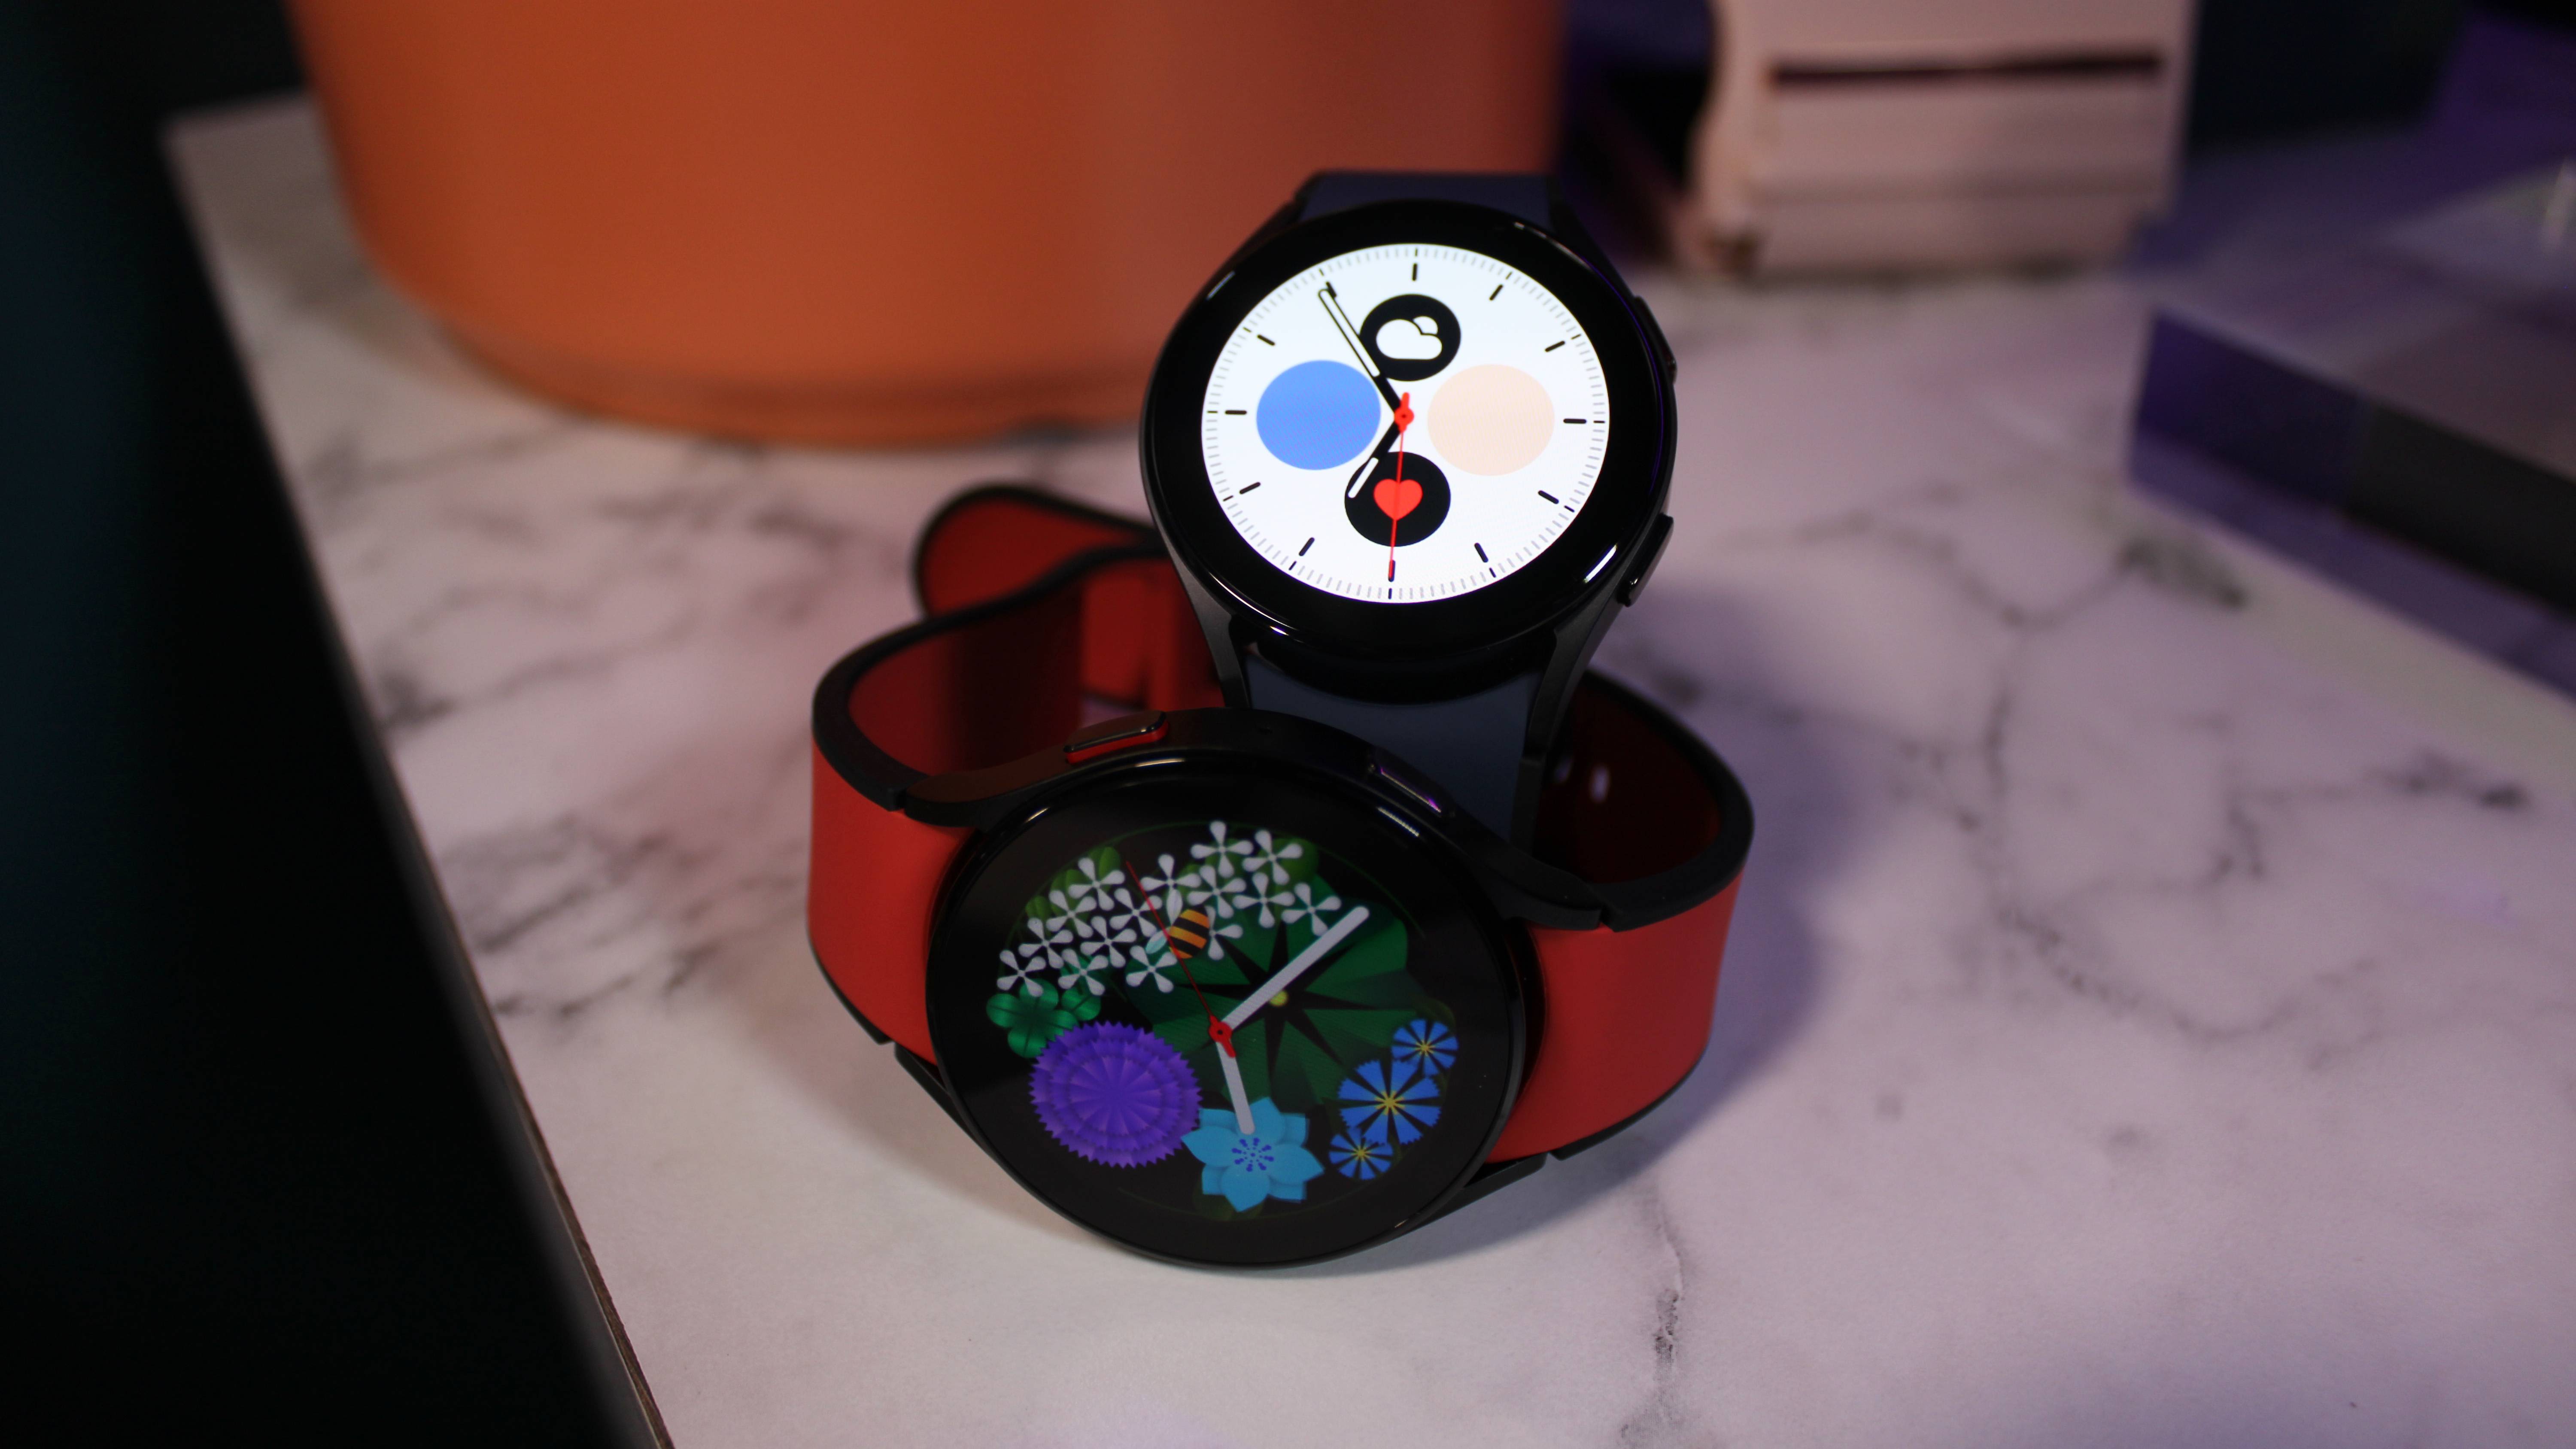 Samsung Galaxy Watch 5 44mm • See best prices today »